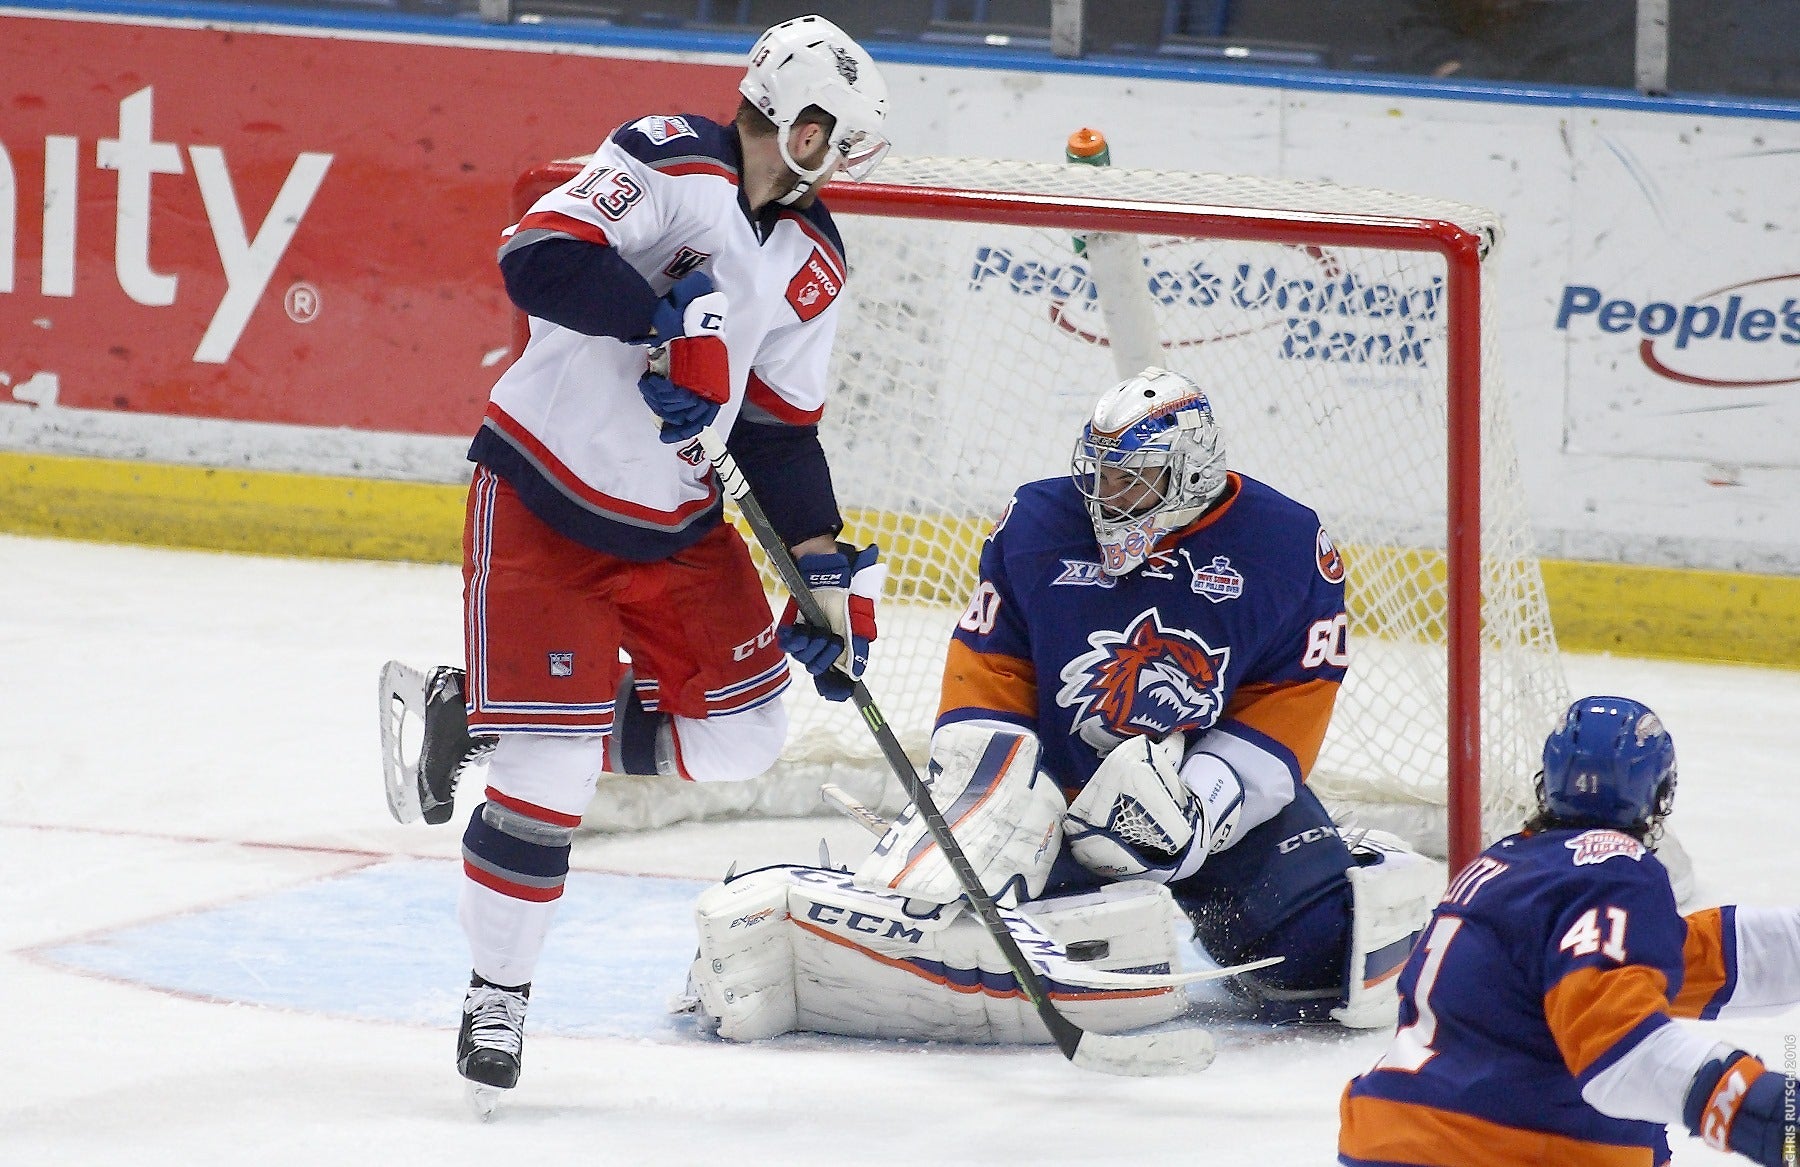 Pack can't Make up Ground on Sound Tigers